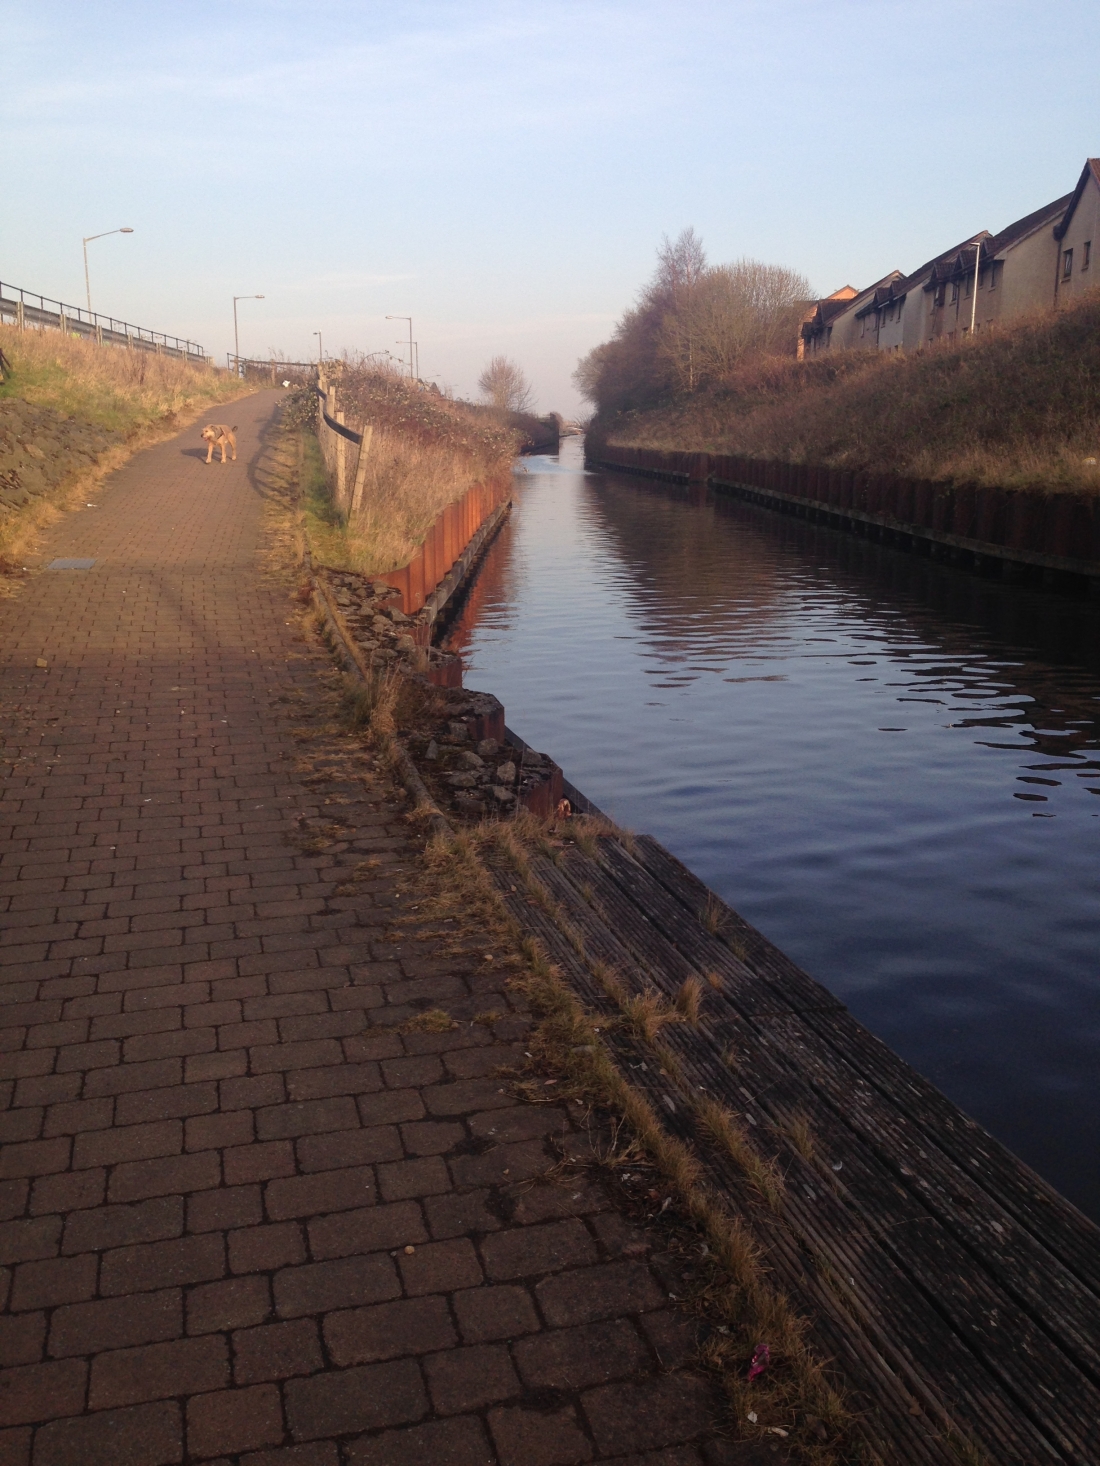 Towpath sloping up to road